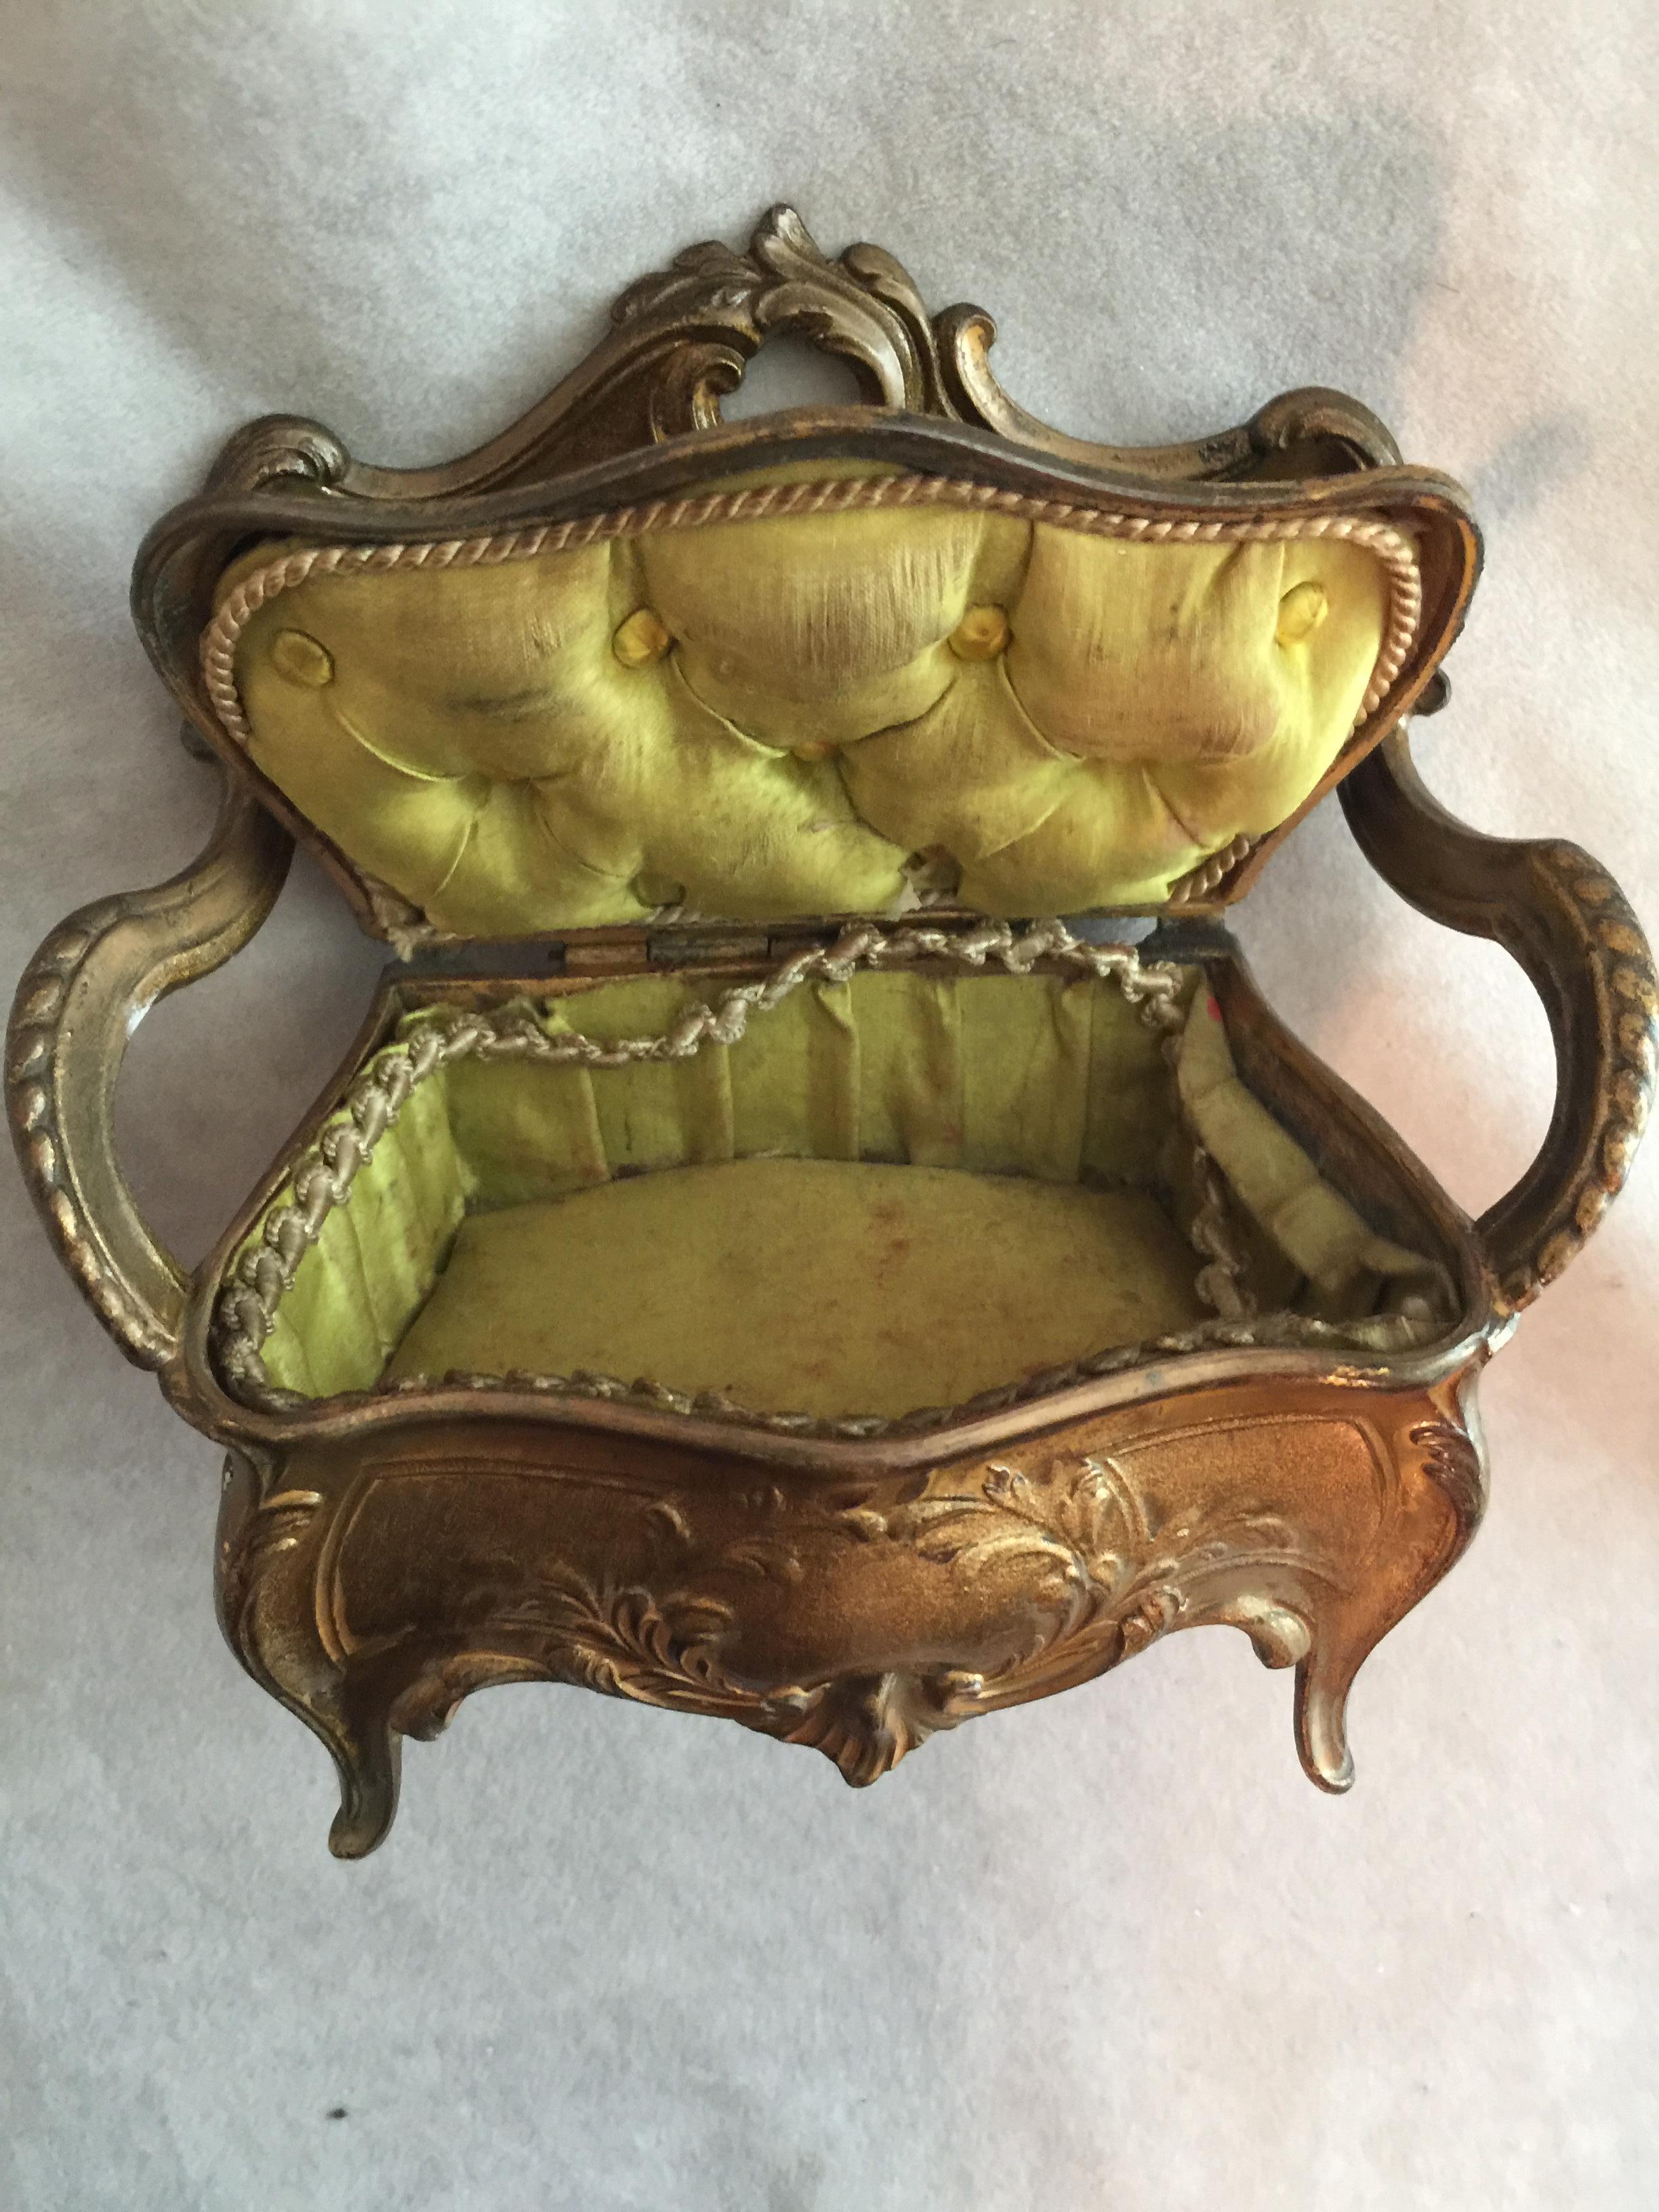 Cast Unusual French Antique Mini Jewelry Box in the Form of a Loveseat, Gilt Metal